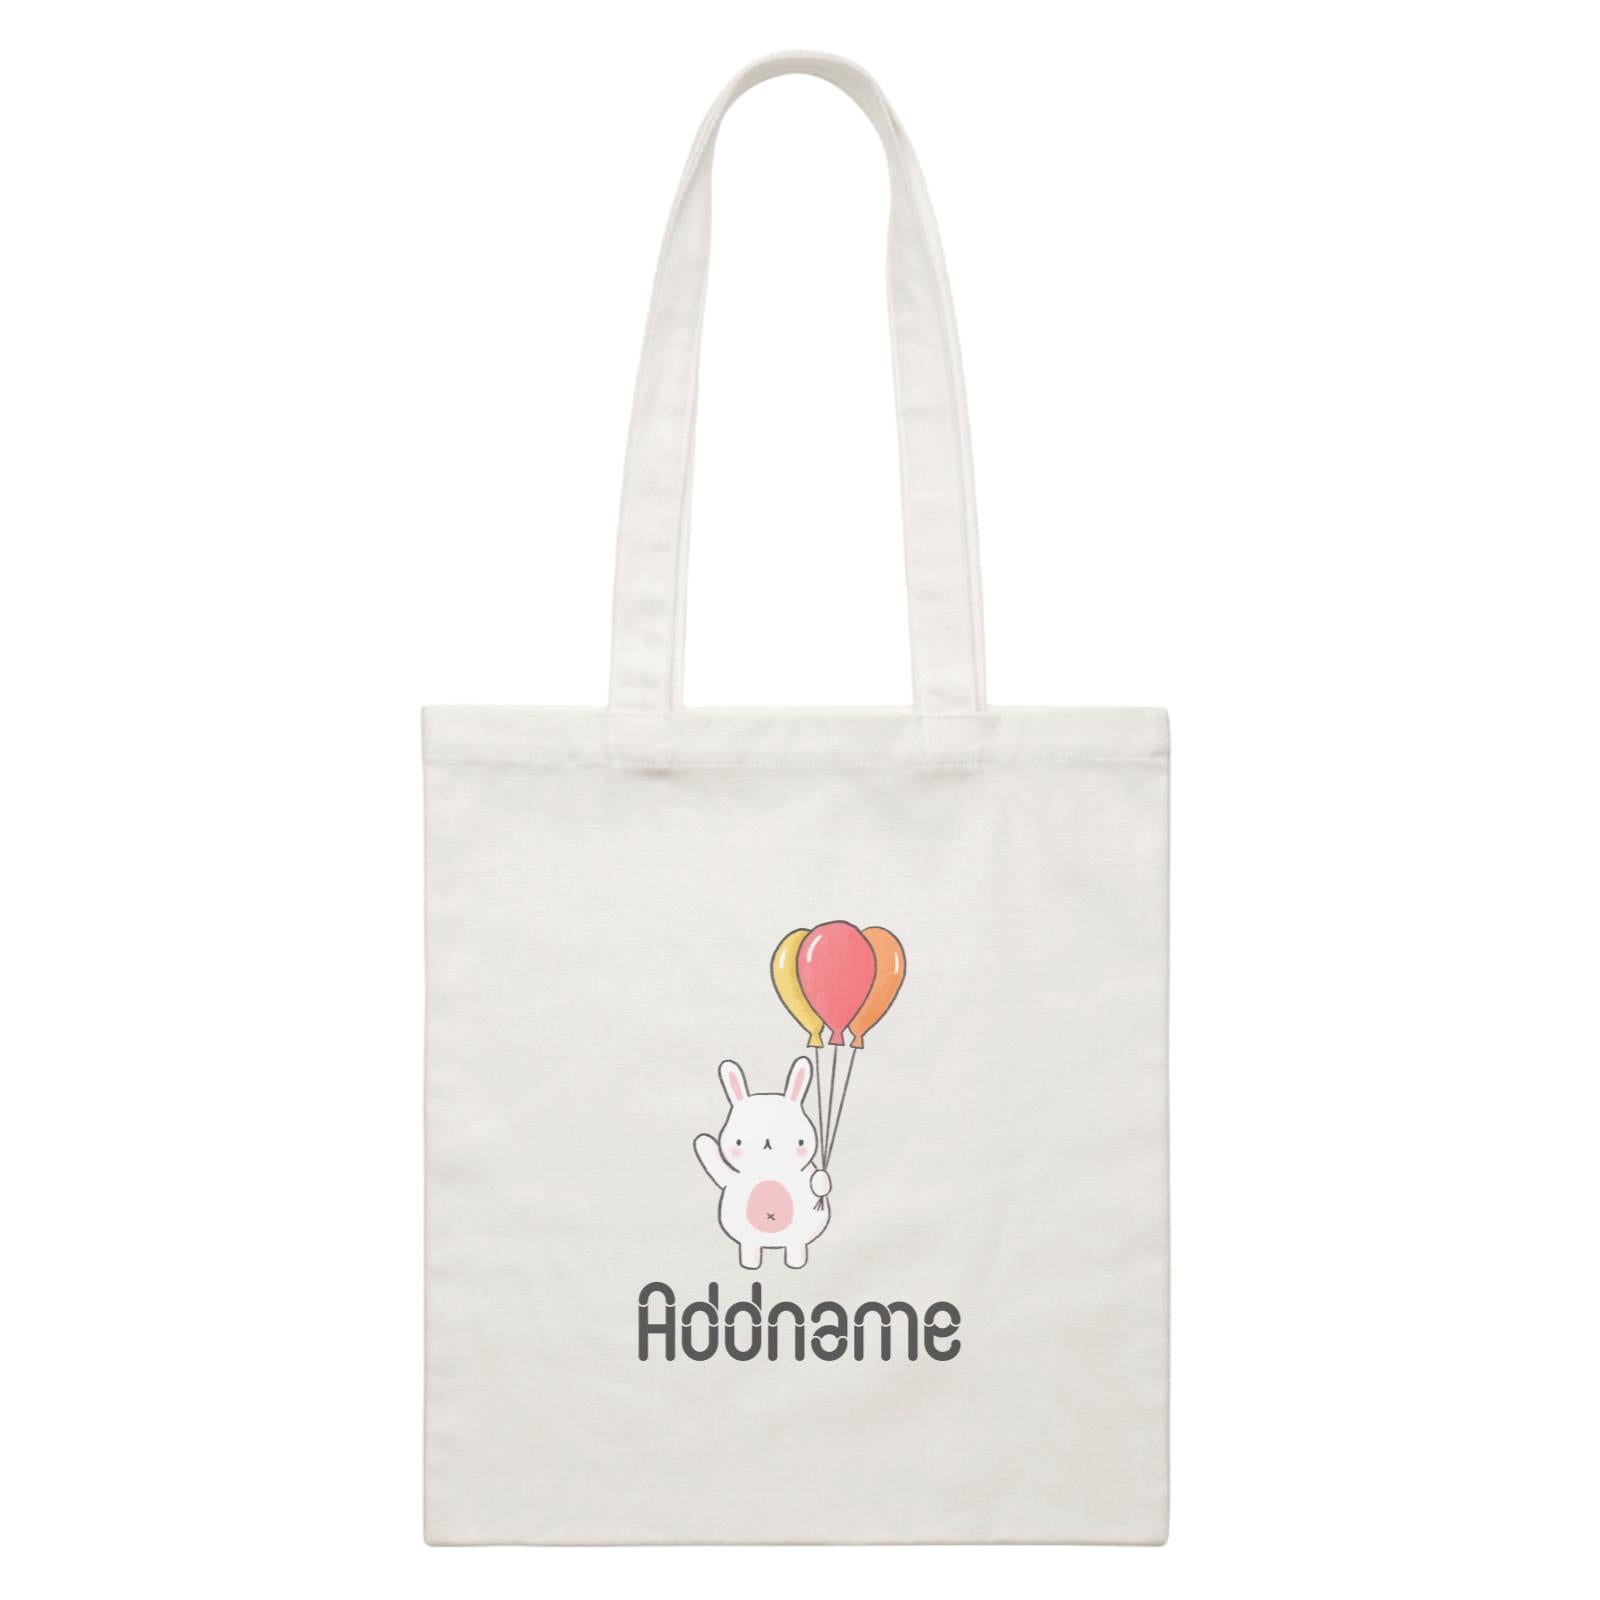 Cute Hand Drawn Style Rabbit with Balloon Addname White Canvas Bag